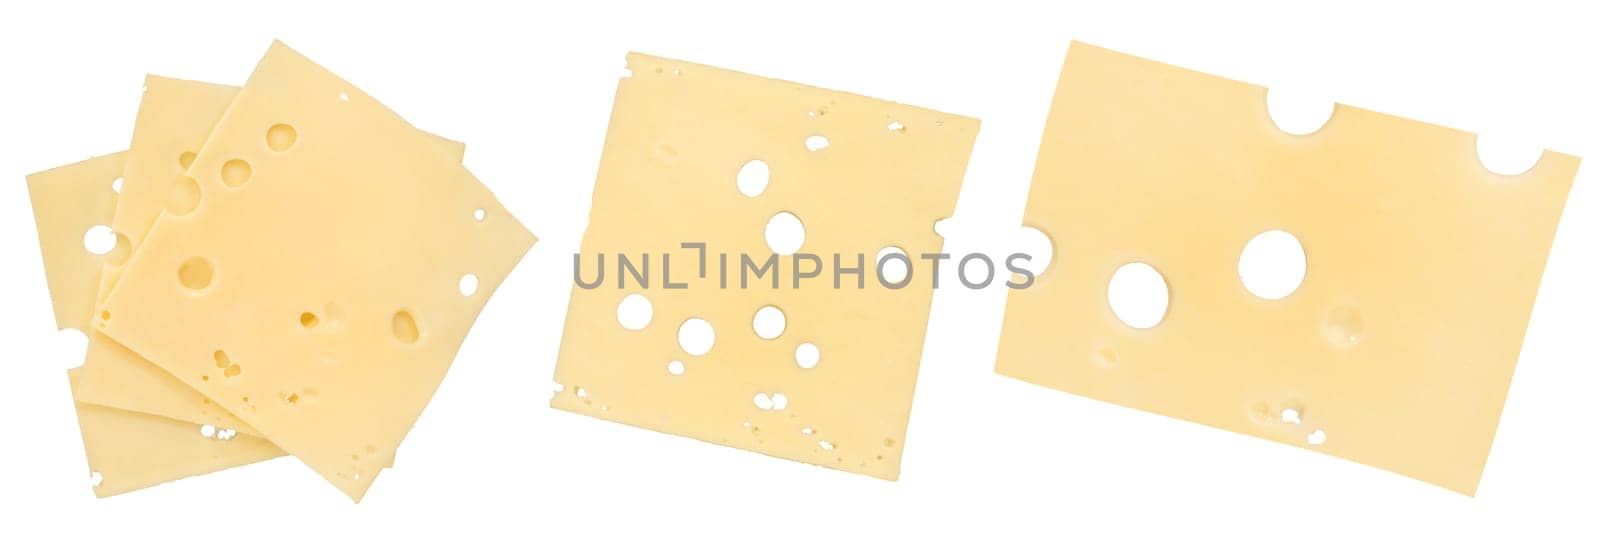 Emmental cheese isolate. Cheese slices with big holes close-up. Emmental cheese is cut into thin slices of different shapes, isolated on a white background. High quality photo